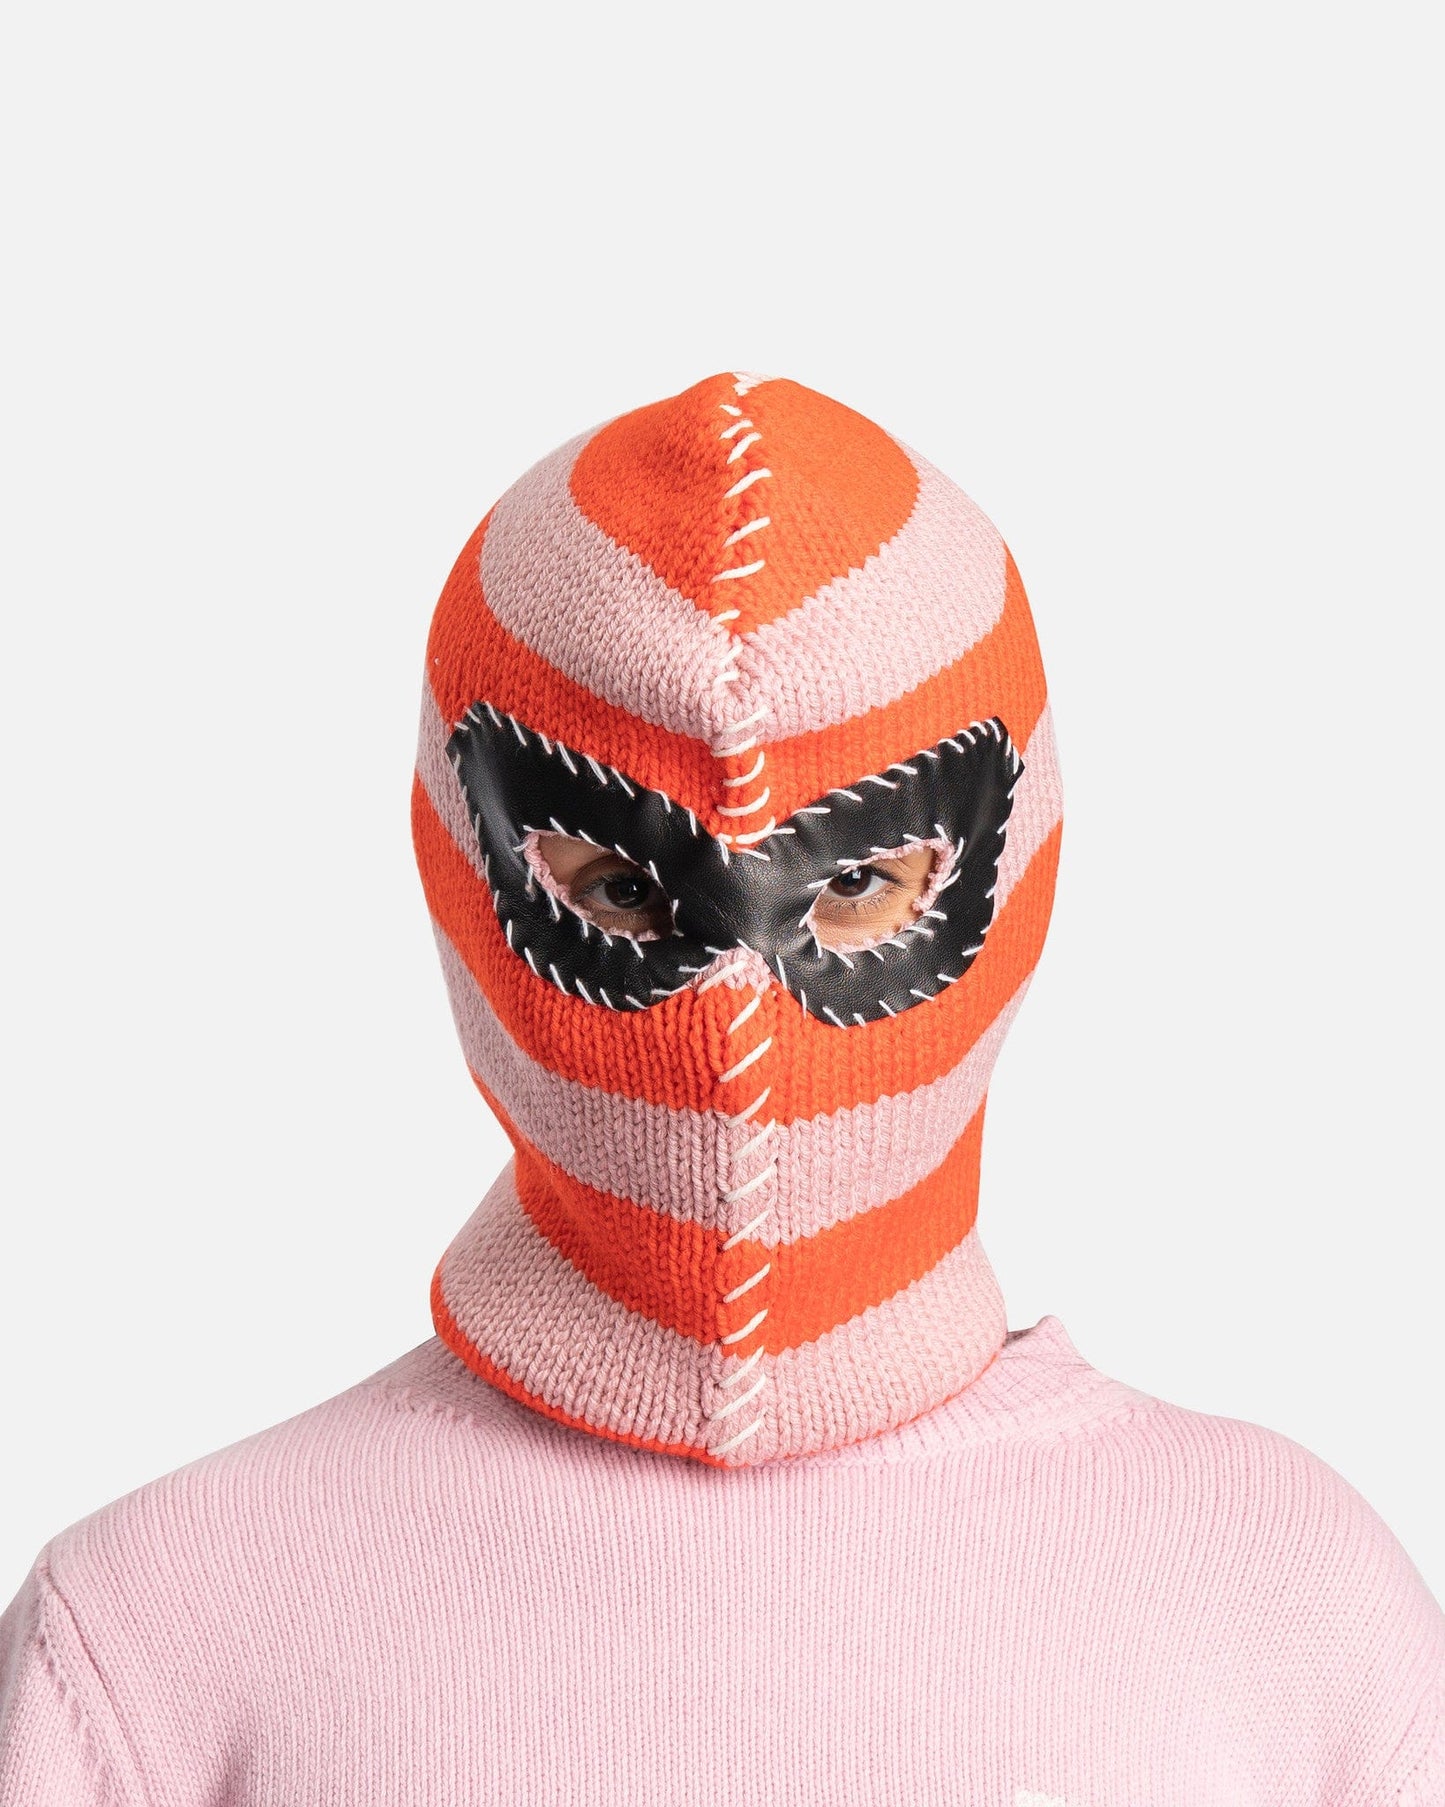 Marni Wool Cable Knit Balaclava in Cinder Rose